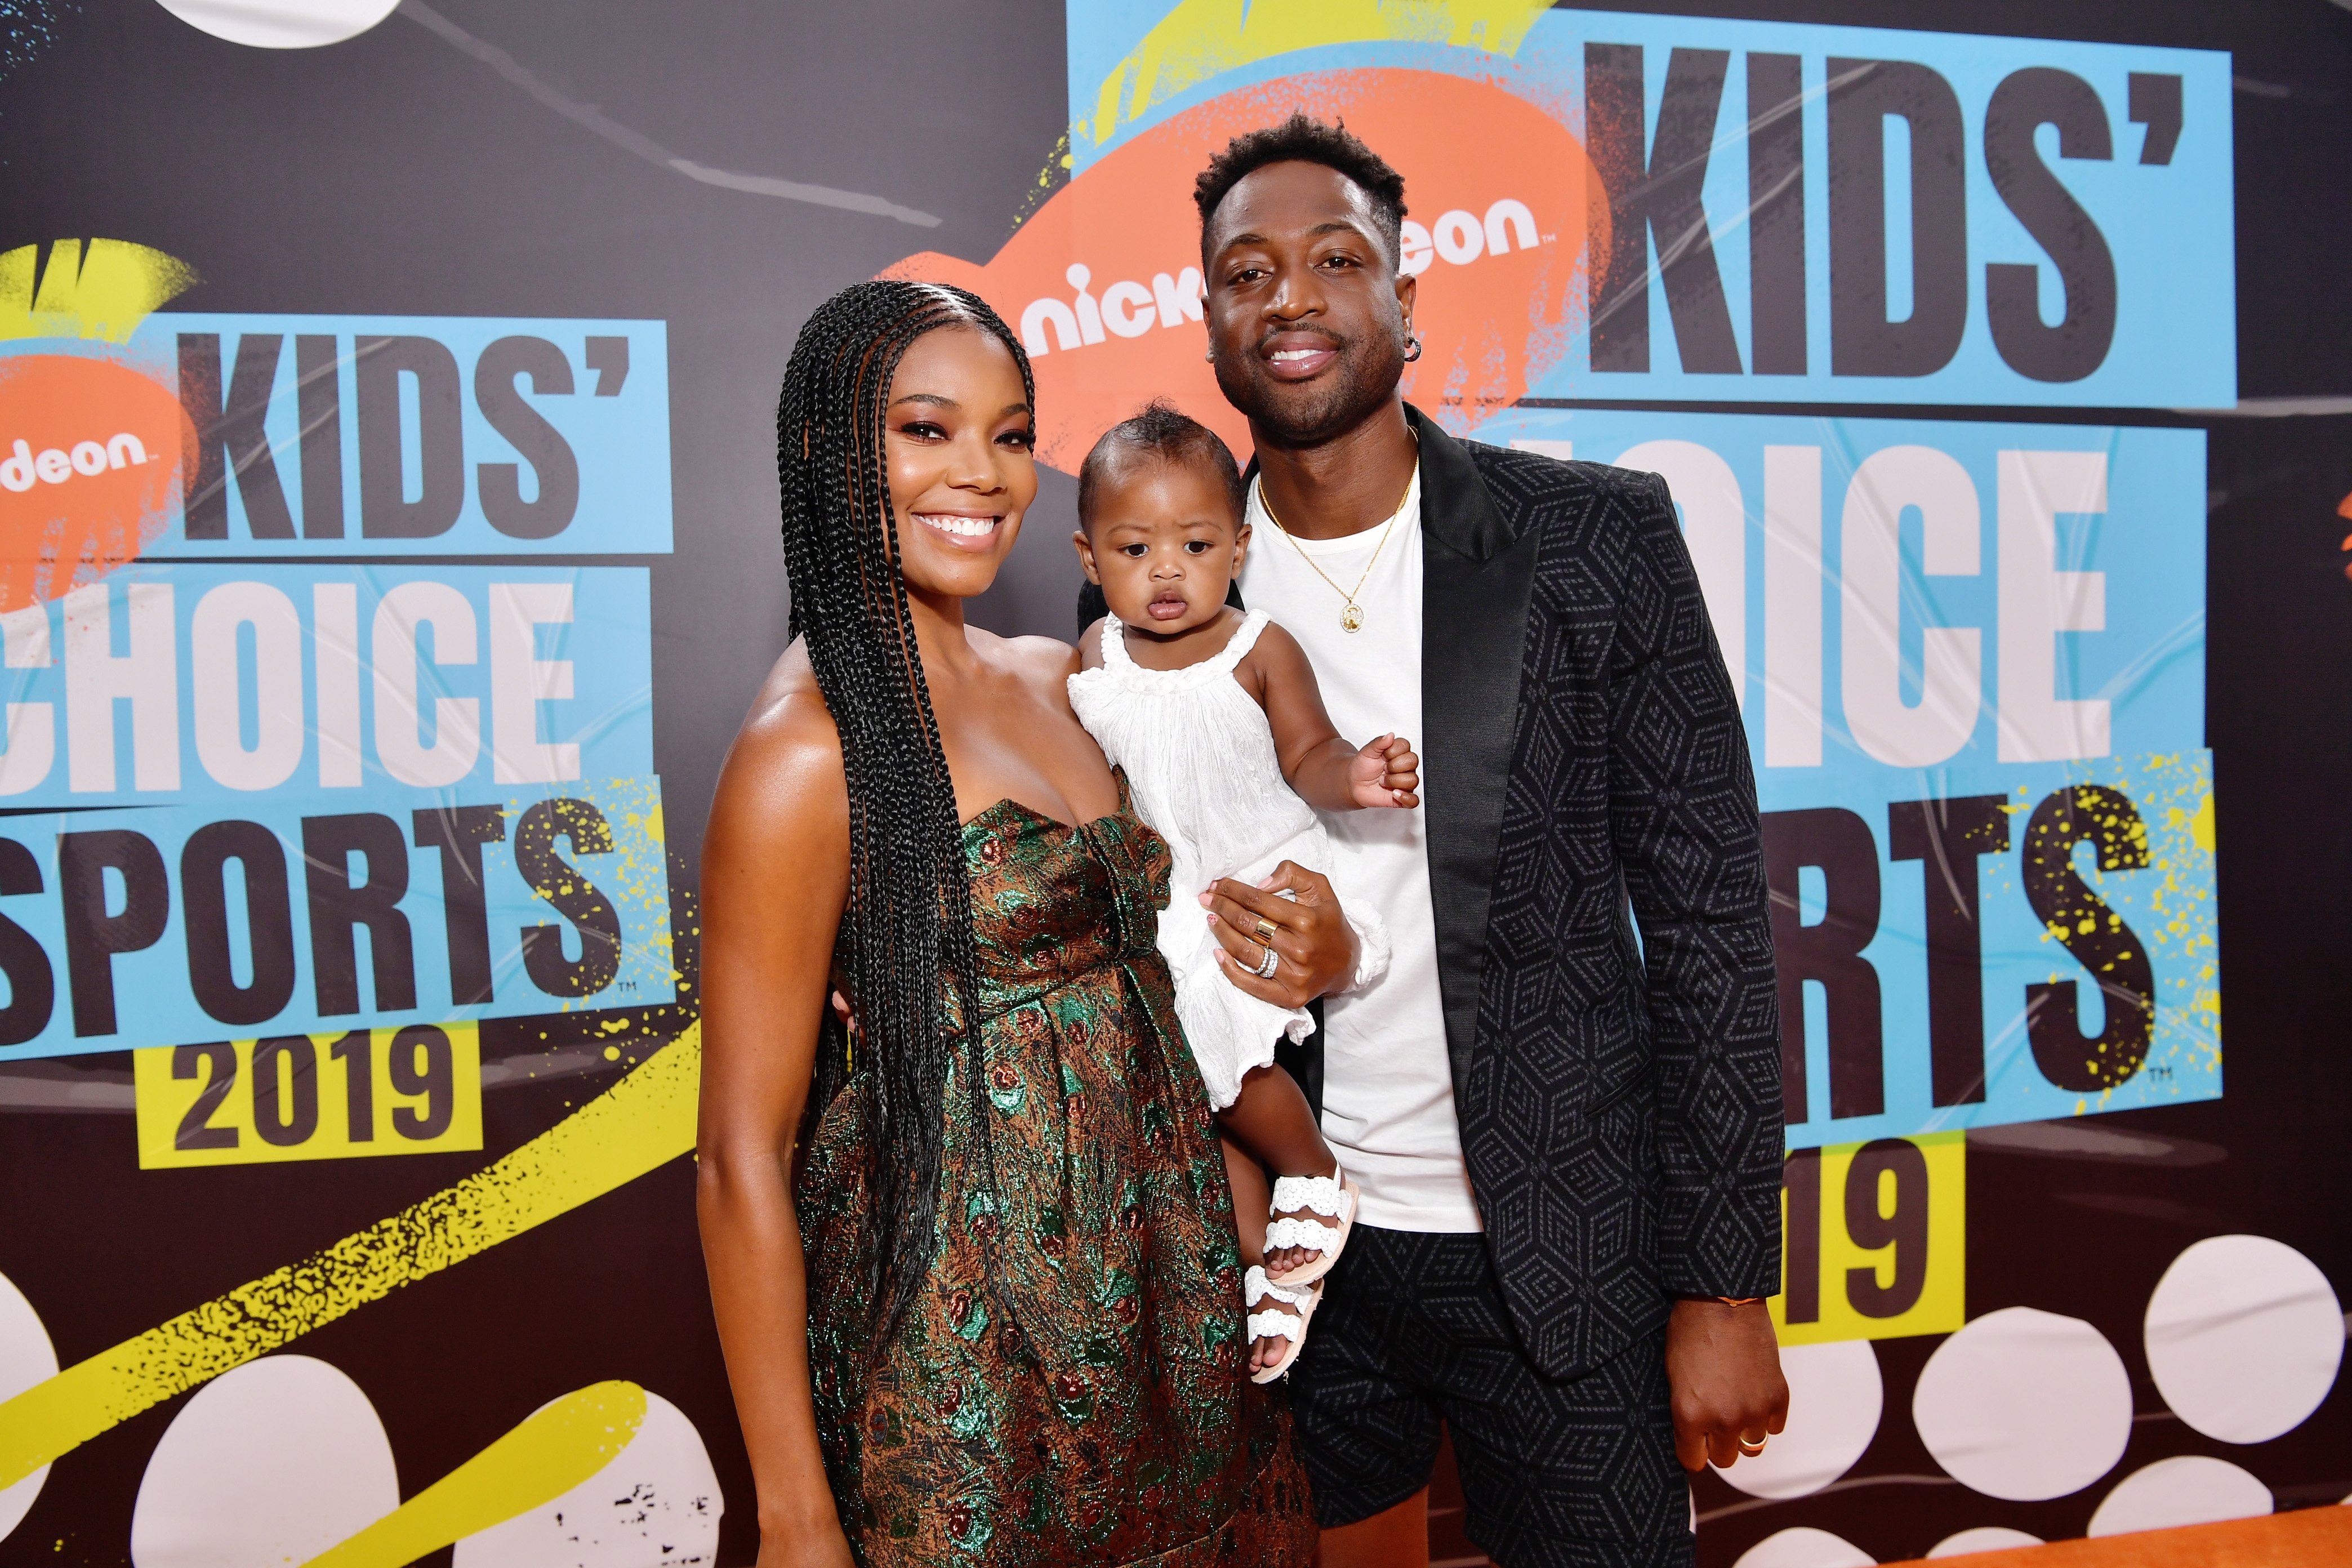 Gabrielle Union and Dwyane Wade with their daughter, Kaavia James, attending Nickelodeon Kids' Choice Sports 2019 on July 11, 2019  | Photo: Getty Images